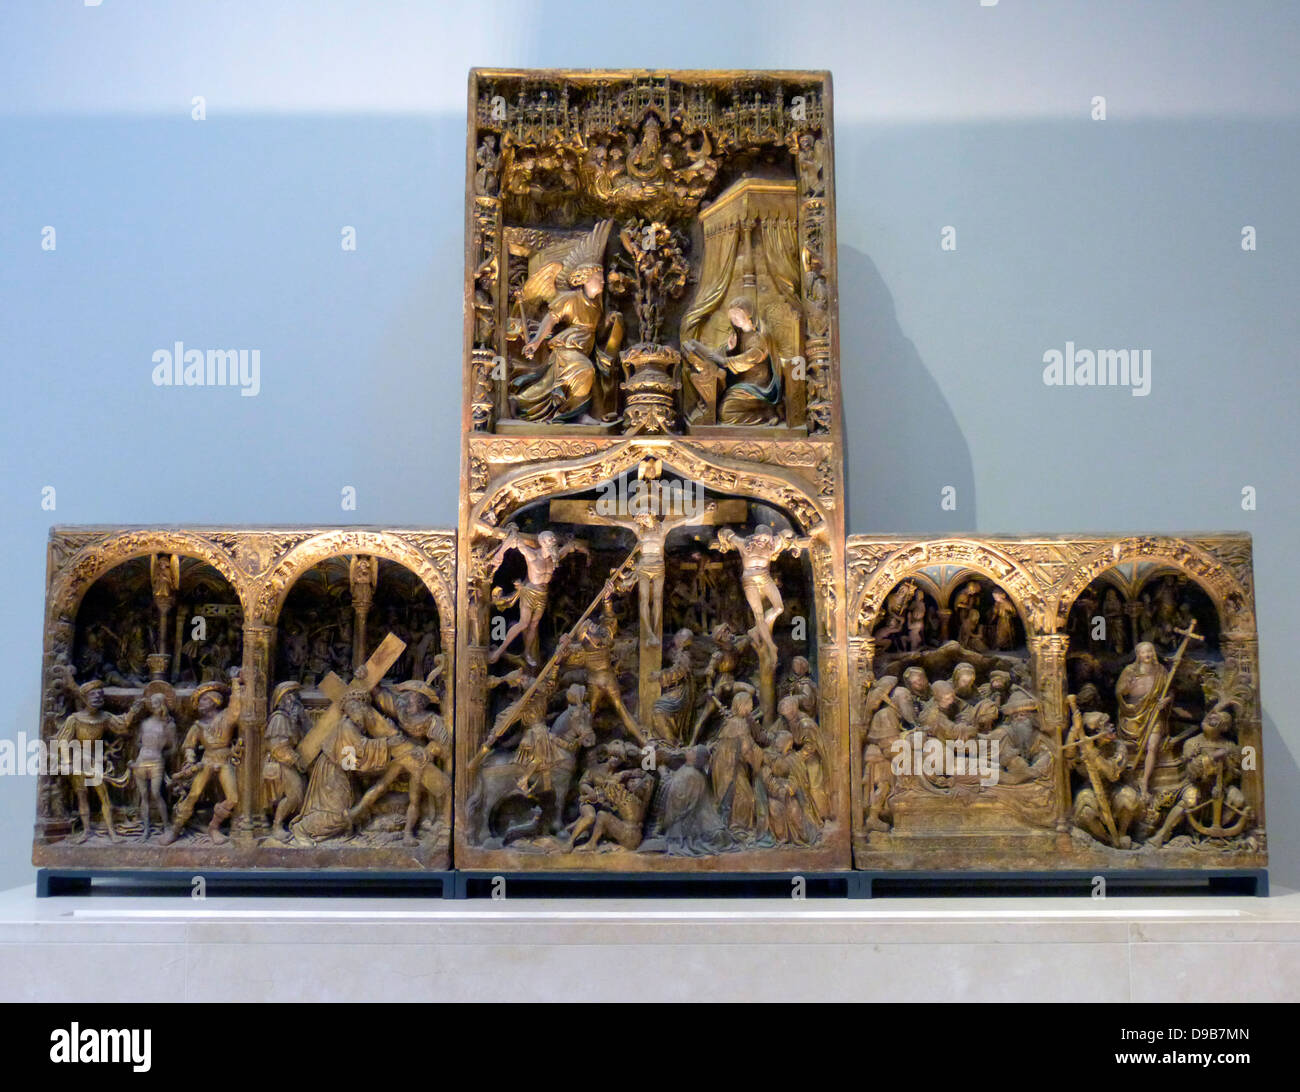 The Troyes Altarpiece circa 1525 (limestone, painted and gilded) was made for Jean Huynard the Elder, a lawyer who was elected dean of the chapter of Lirey in 1504.  Amid the scenes of Christ's arrest, death and resurrection, Jean can be found kneeling at the foot of the cross.  His family shields appear in the spandrels between the arches on the left and right sides. Stock Photo